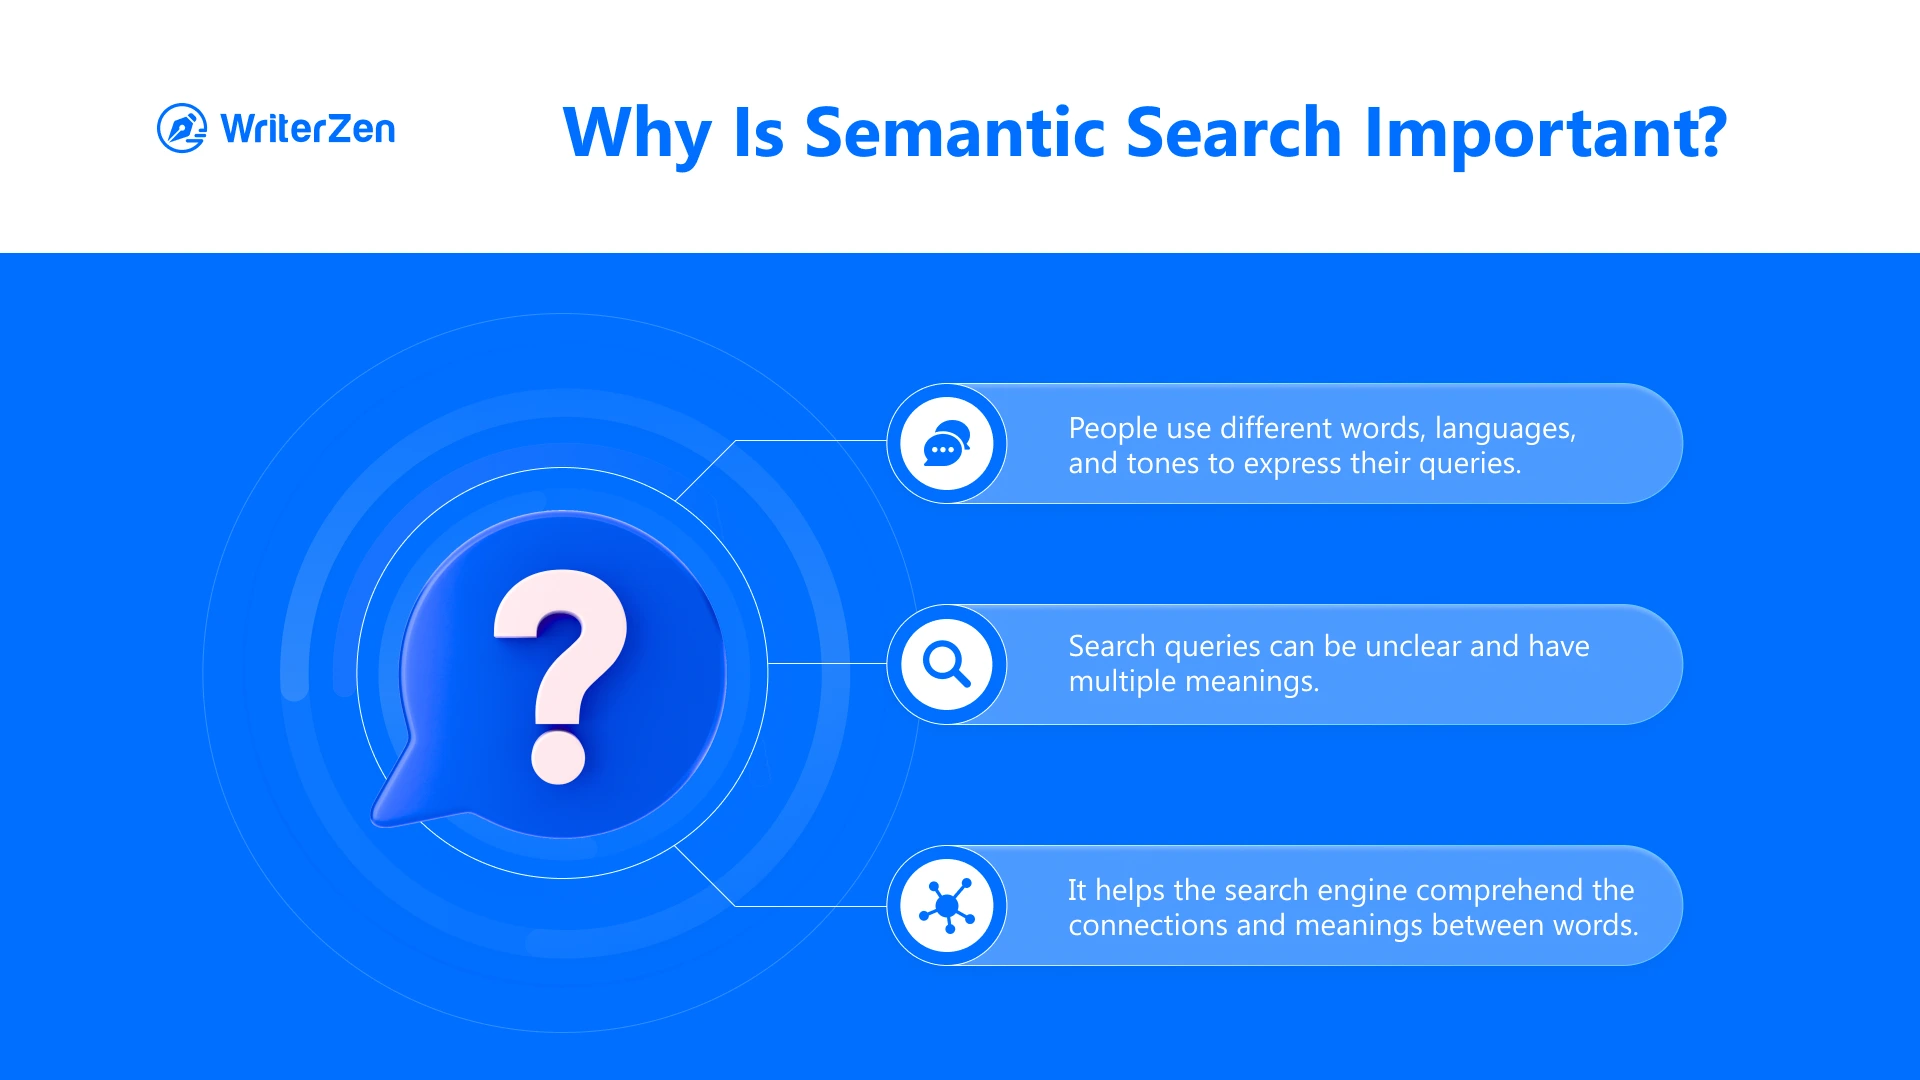 Why is Semantic Search Important